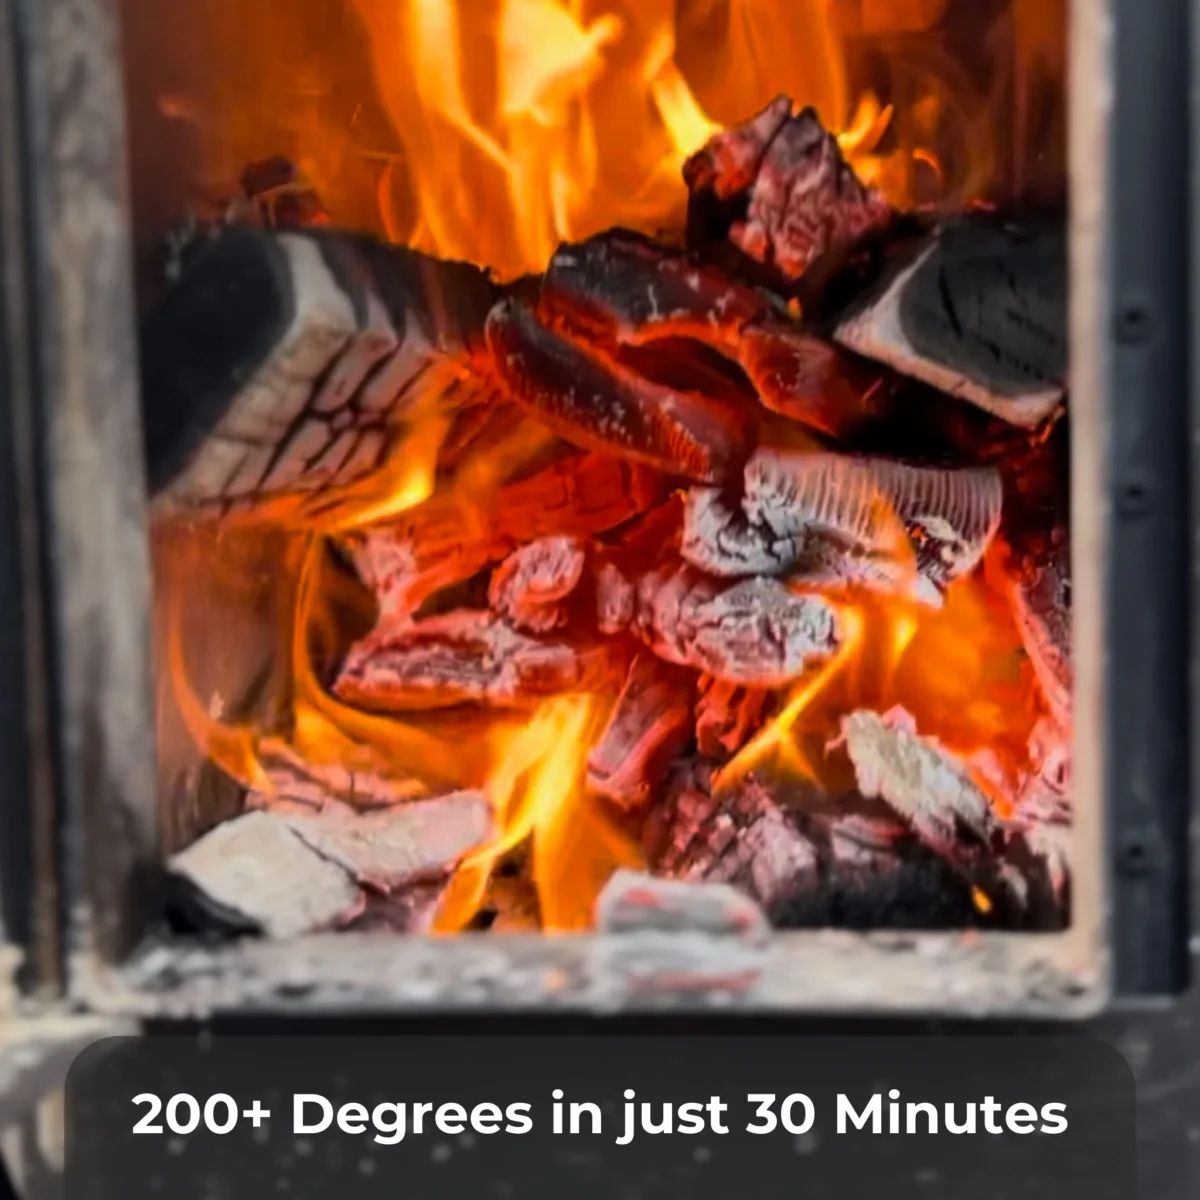 North Shore Sauna Tent Stove gets over 200 degrees in 30 minutes